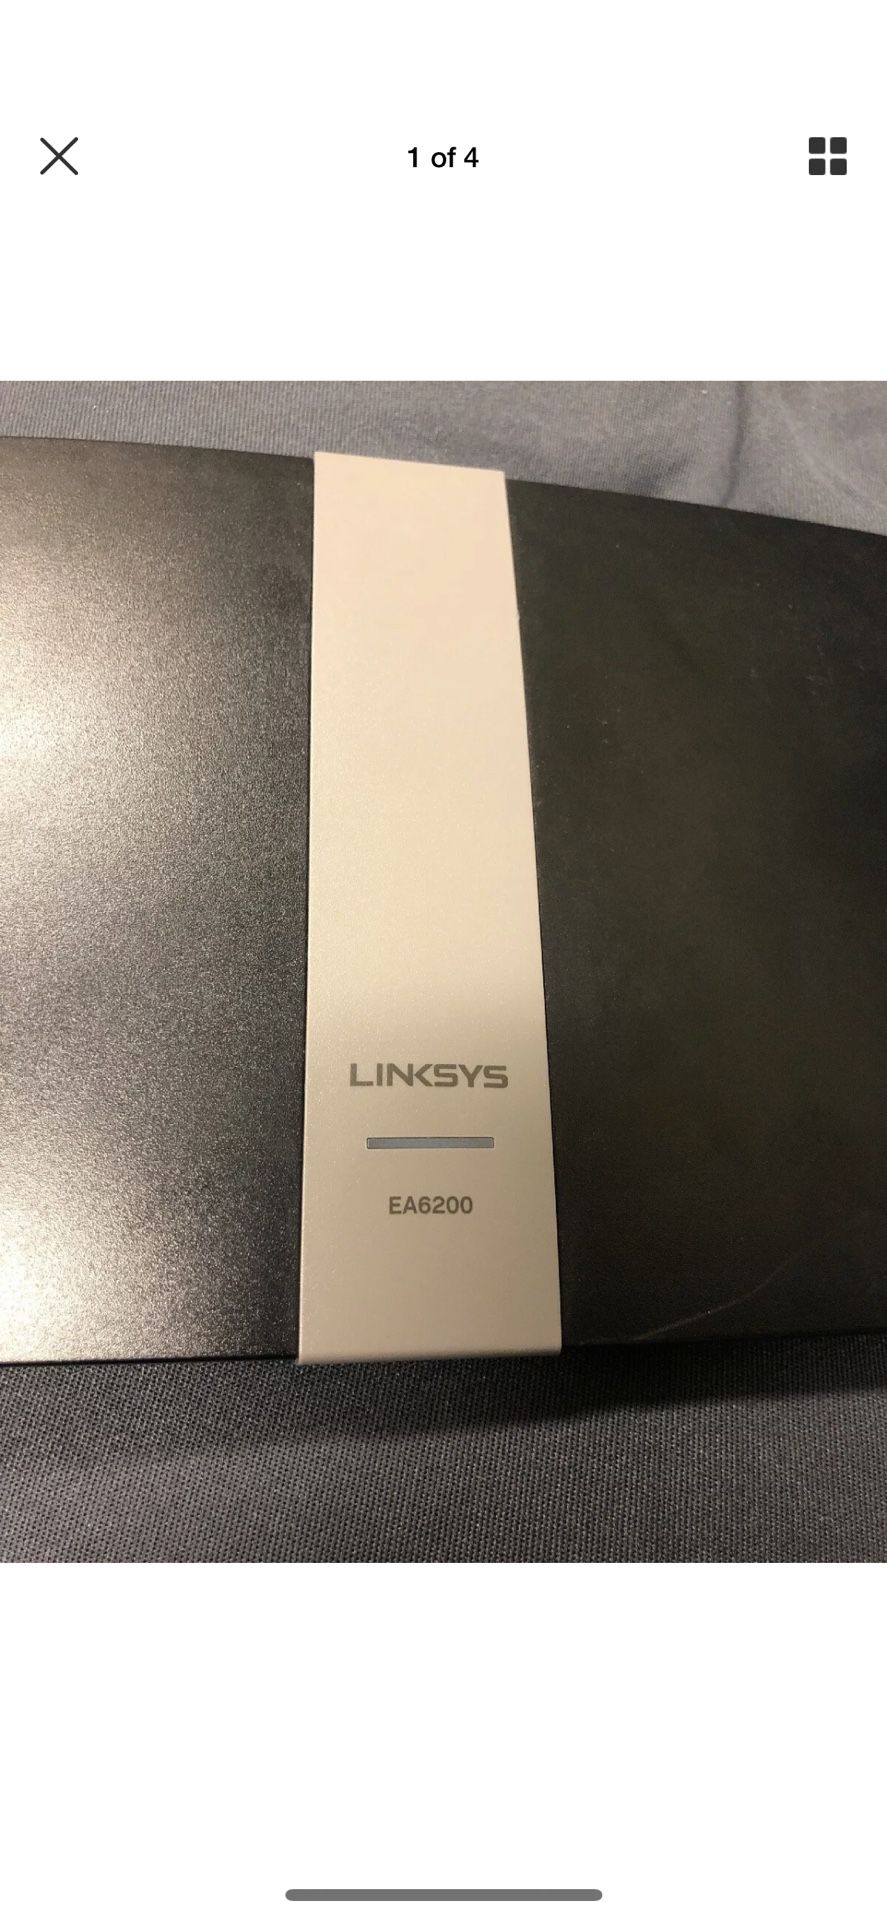 Linksys Wireless Router (EA6200) 4 ports